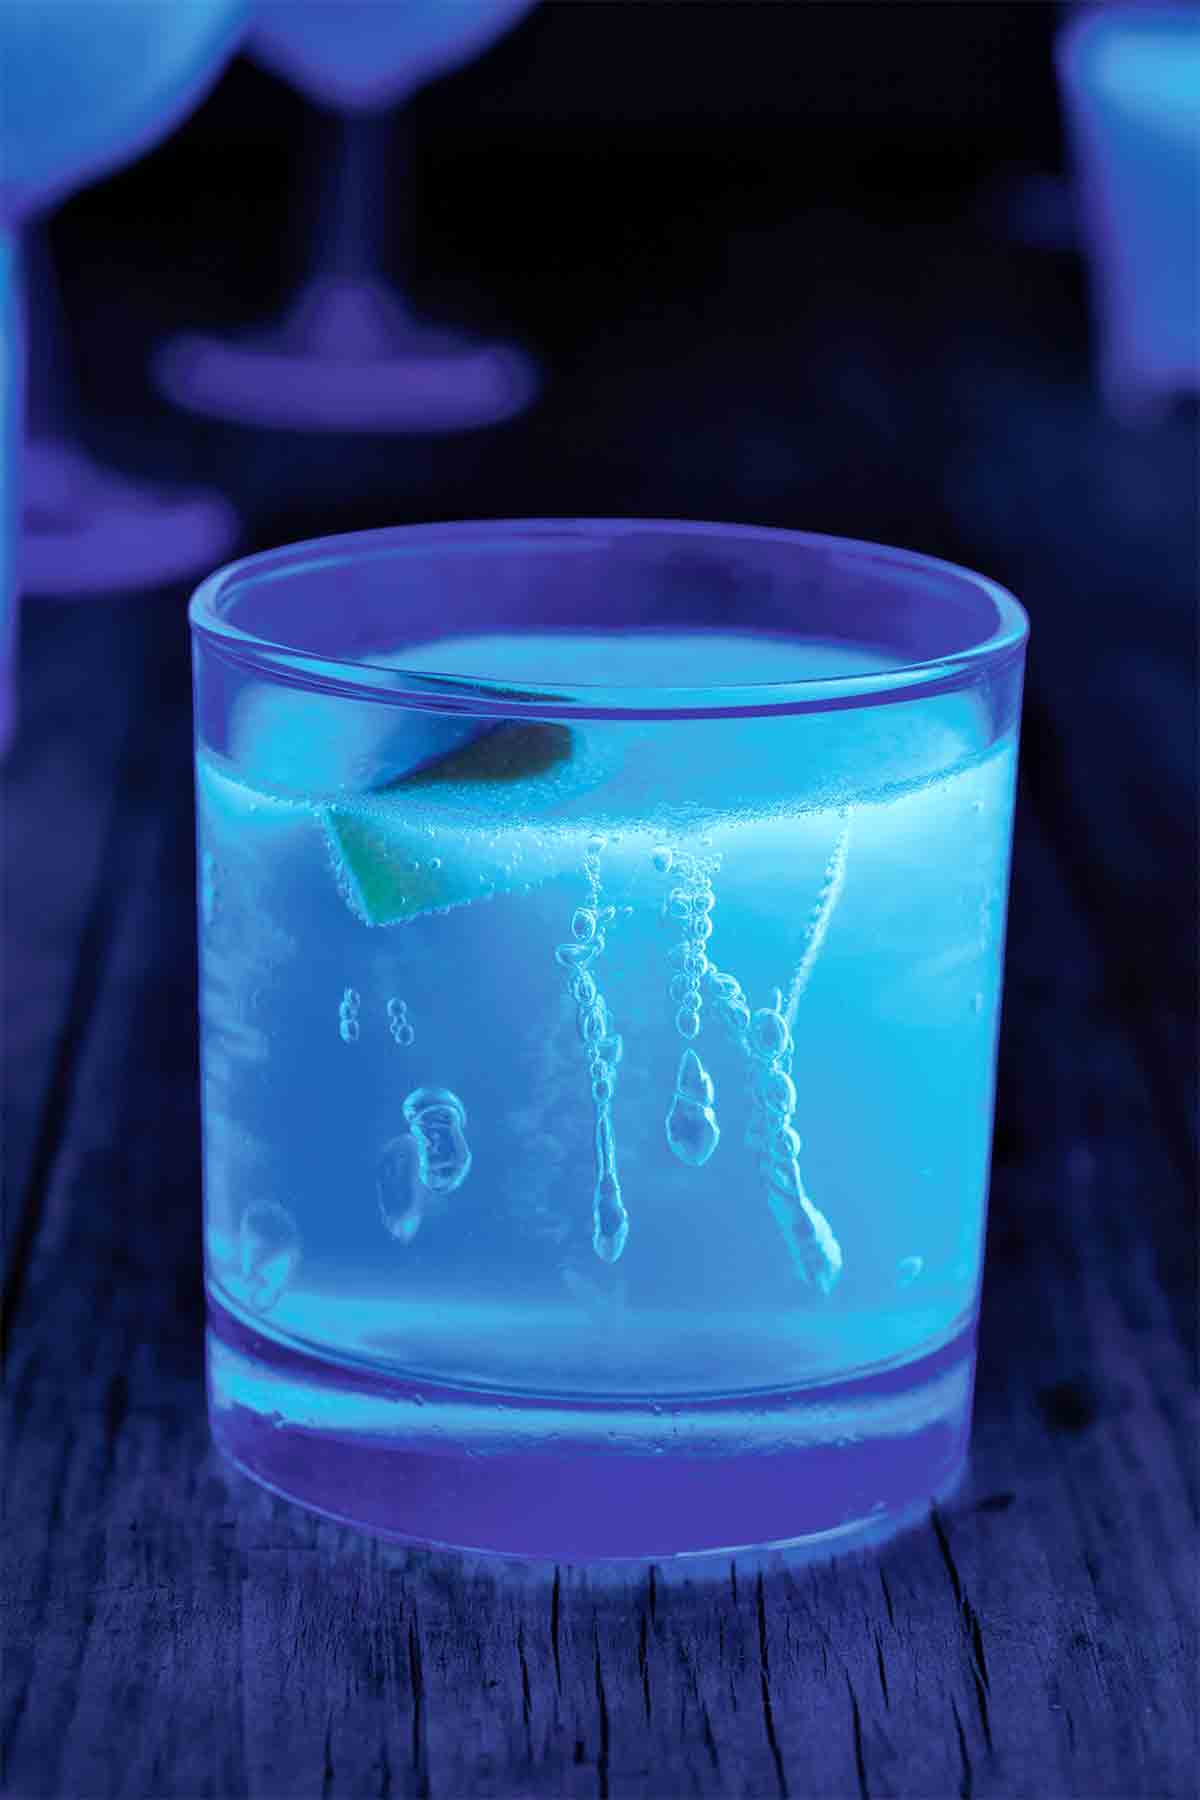 A rocks glass filled with neon blue glow-in-the-dark Jello on a dark background.